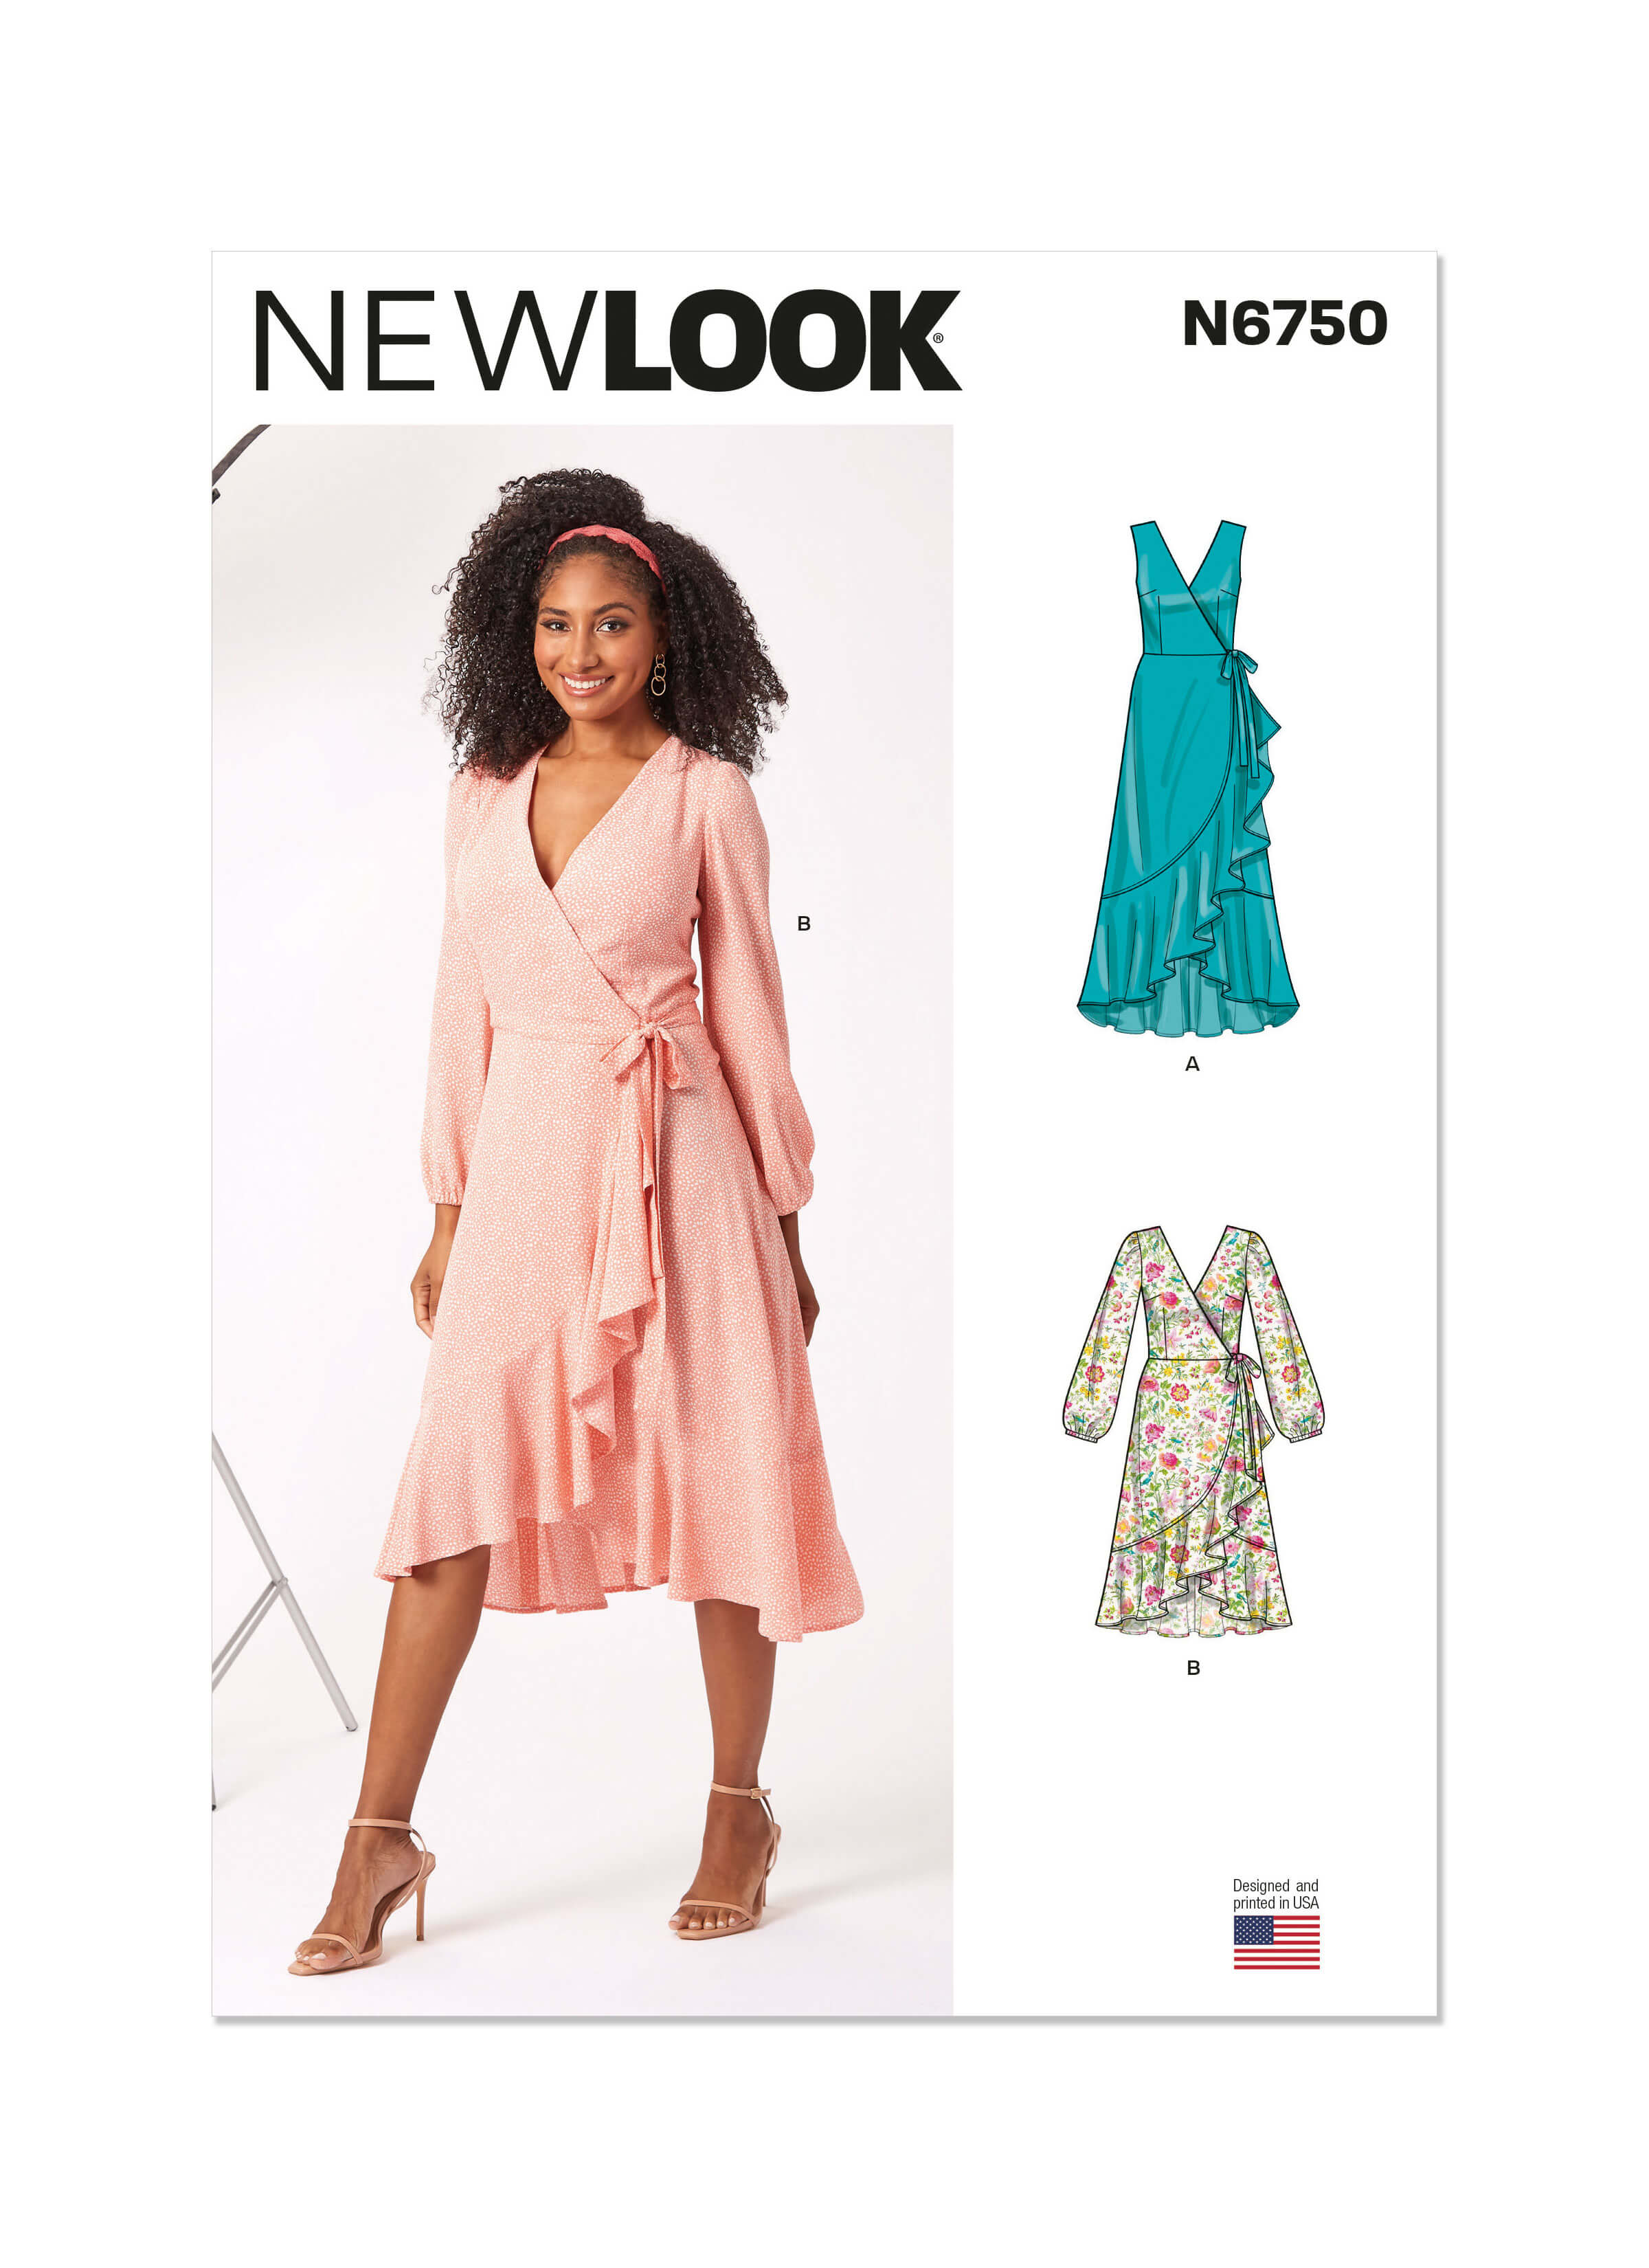 New Look Sewing Pattern N6750 Misses' Wrap Dress With Length and Sleeve Variations